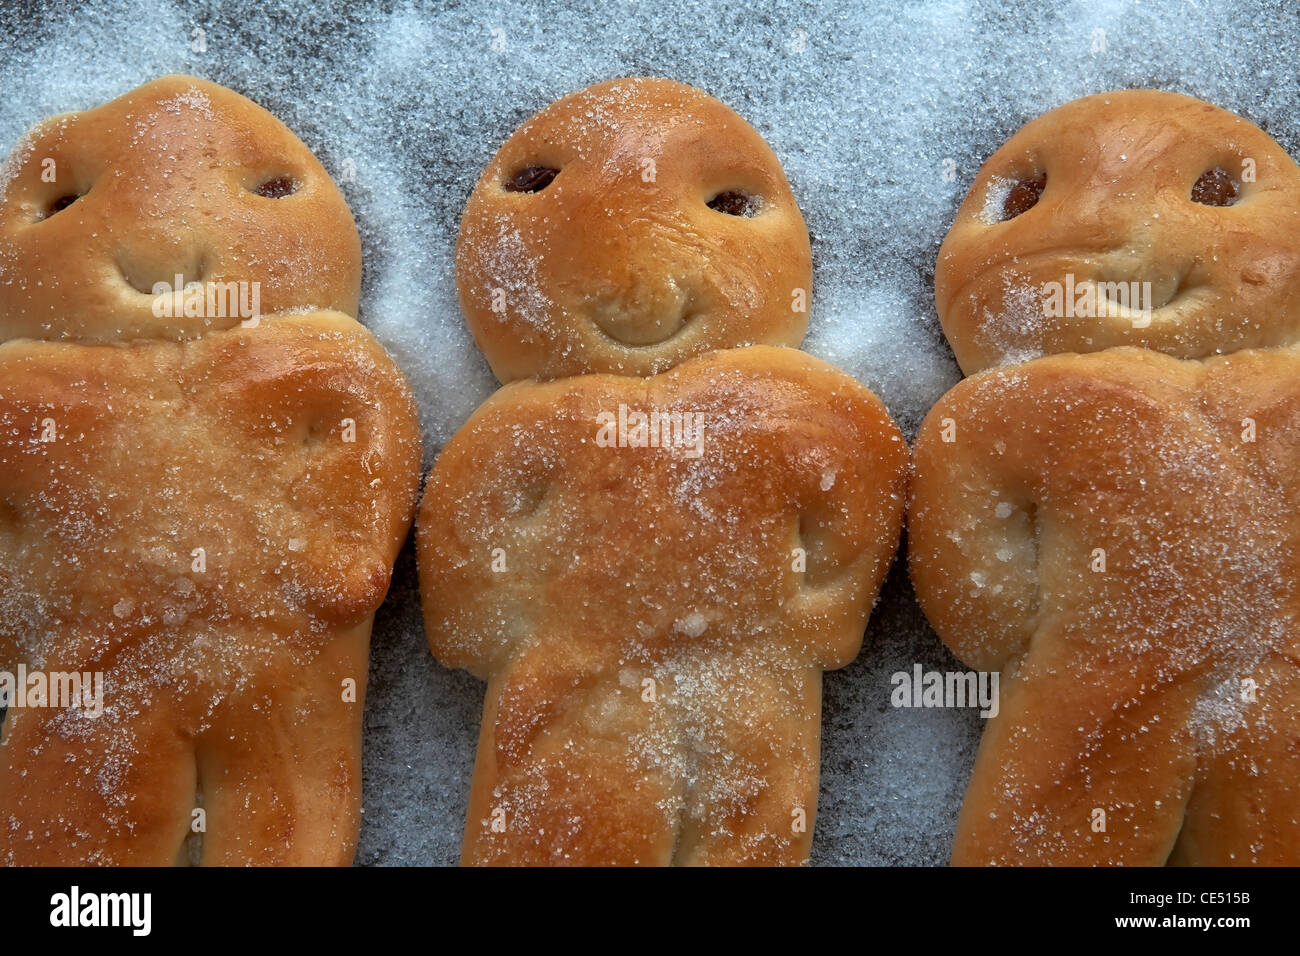 Grittibänz - the Swiss version of the man's mare yeast dough with raisins and sugar.  Stock Photo